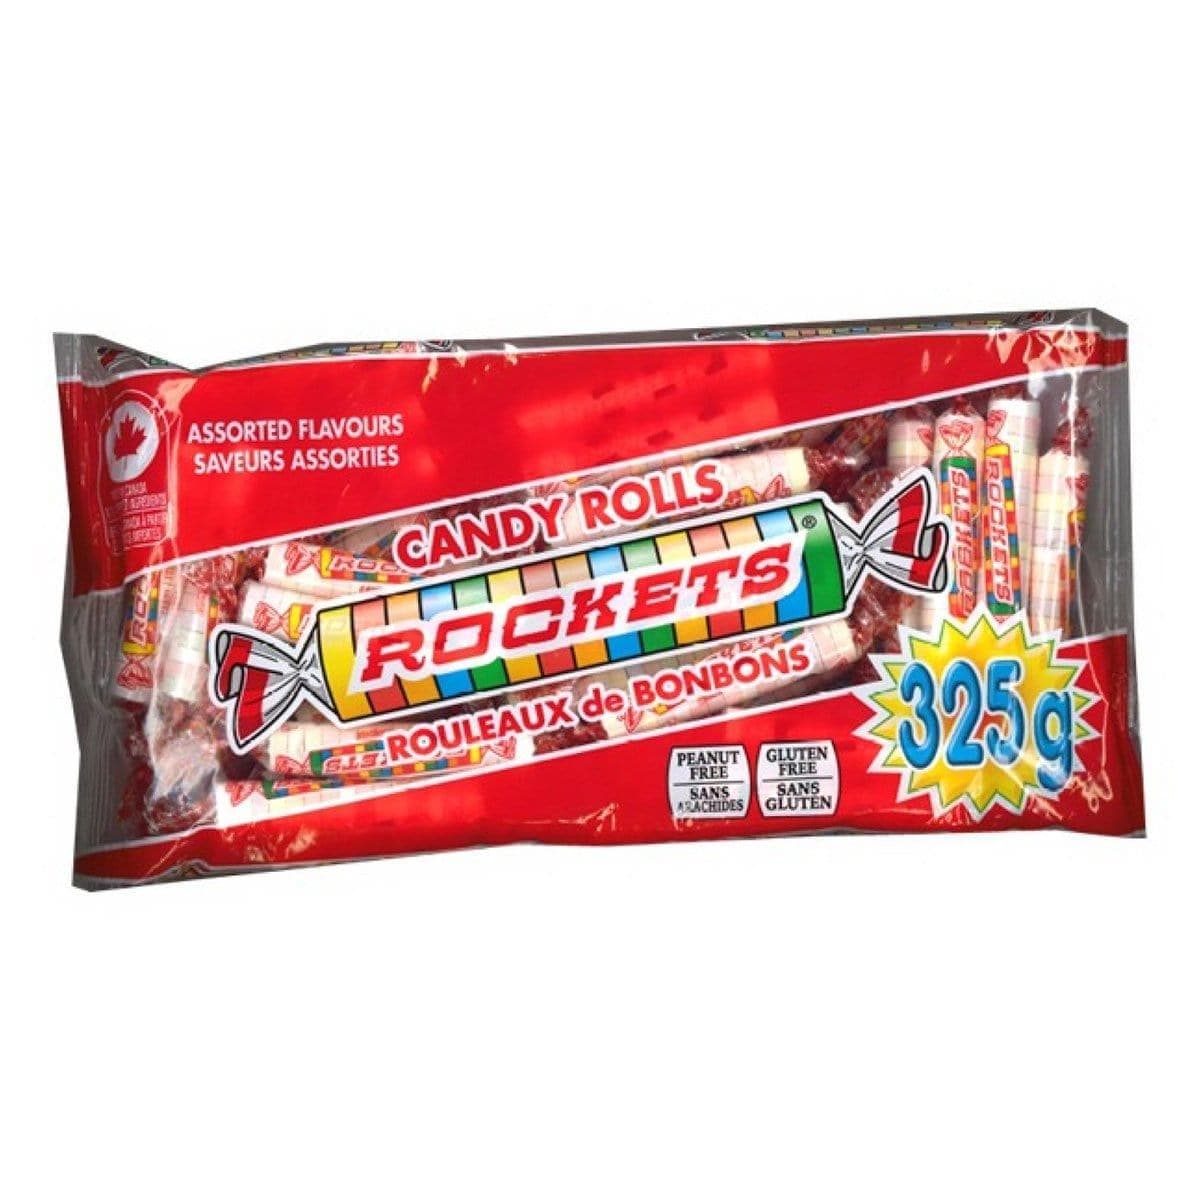 Buy Candy Rockets Bags 325g sold at Party Expert